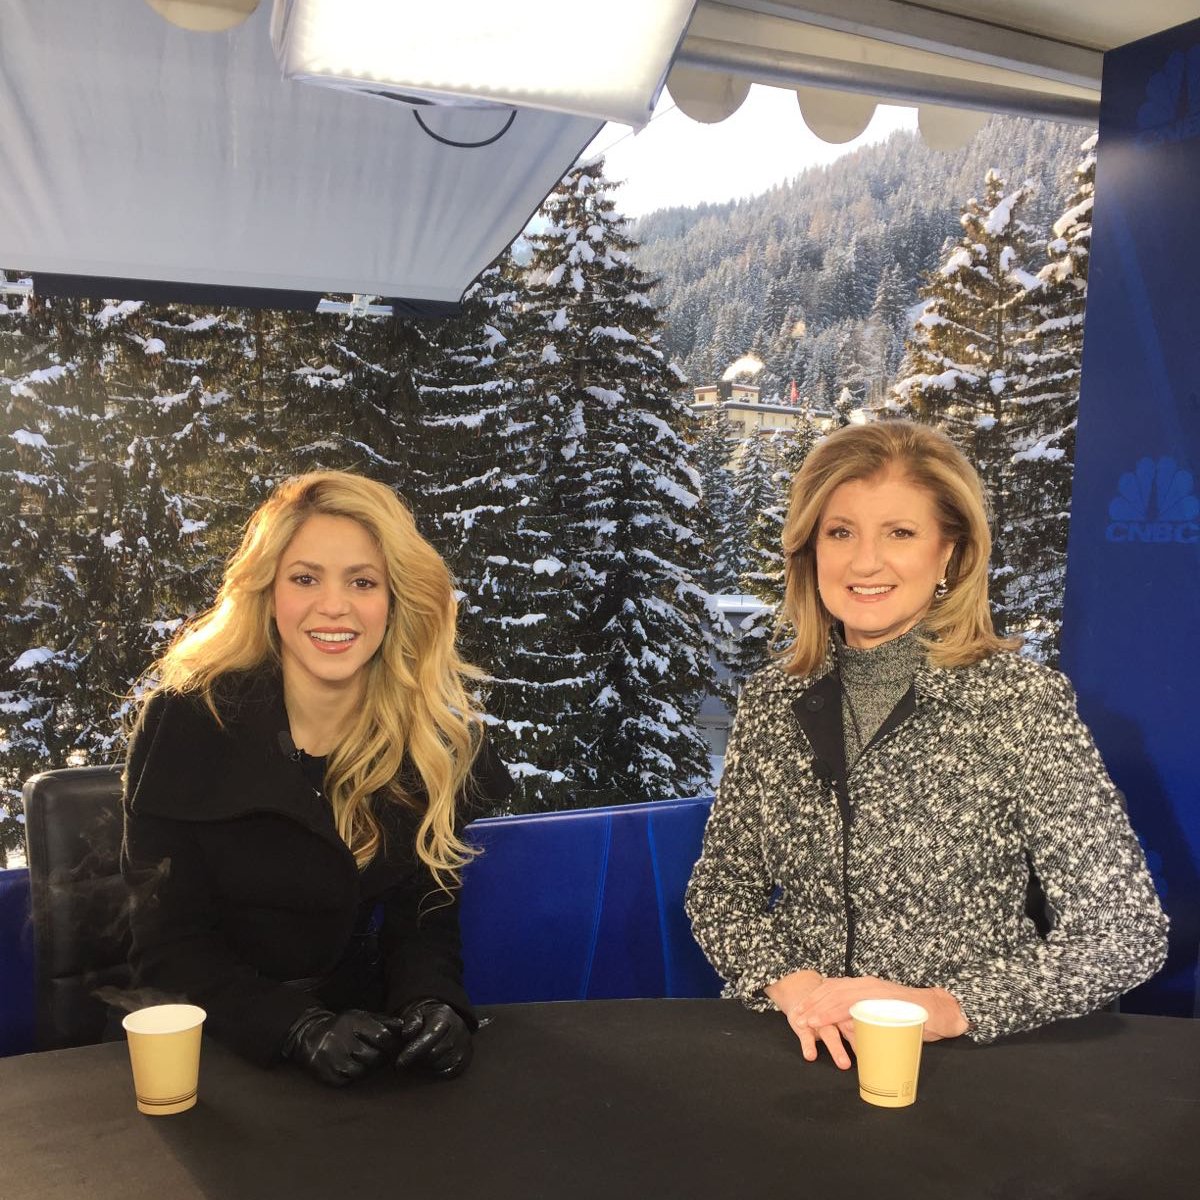 Watch Shak chatting #FacetoFace with @ariannahuff for @CNBC at #wef17 in Davos, at https://t.co/YMDbcIf06c ShakHQ https://t.co/ErxPLuJhN1